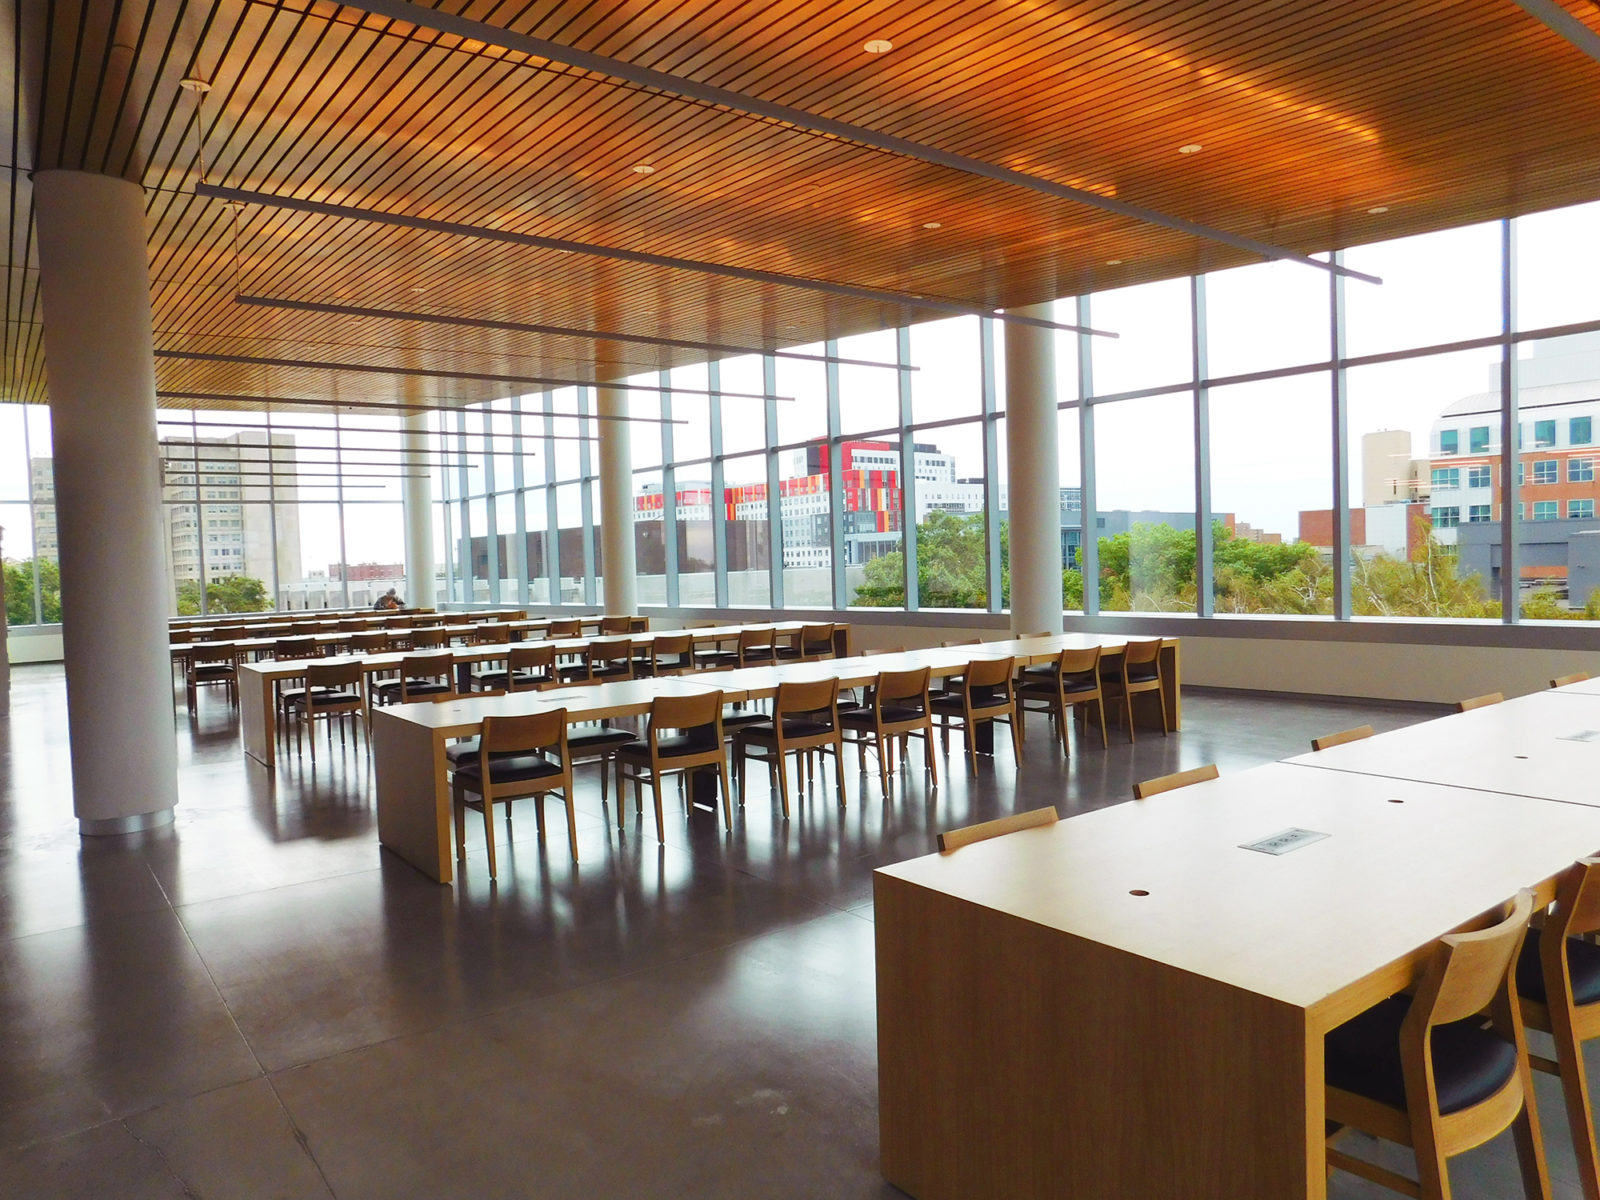 Open room with full windows on all sides, wooden slat ceiling and rows of long collaborative tables and chairs.